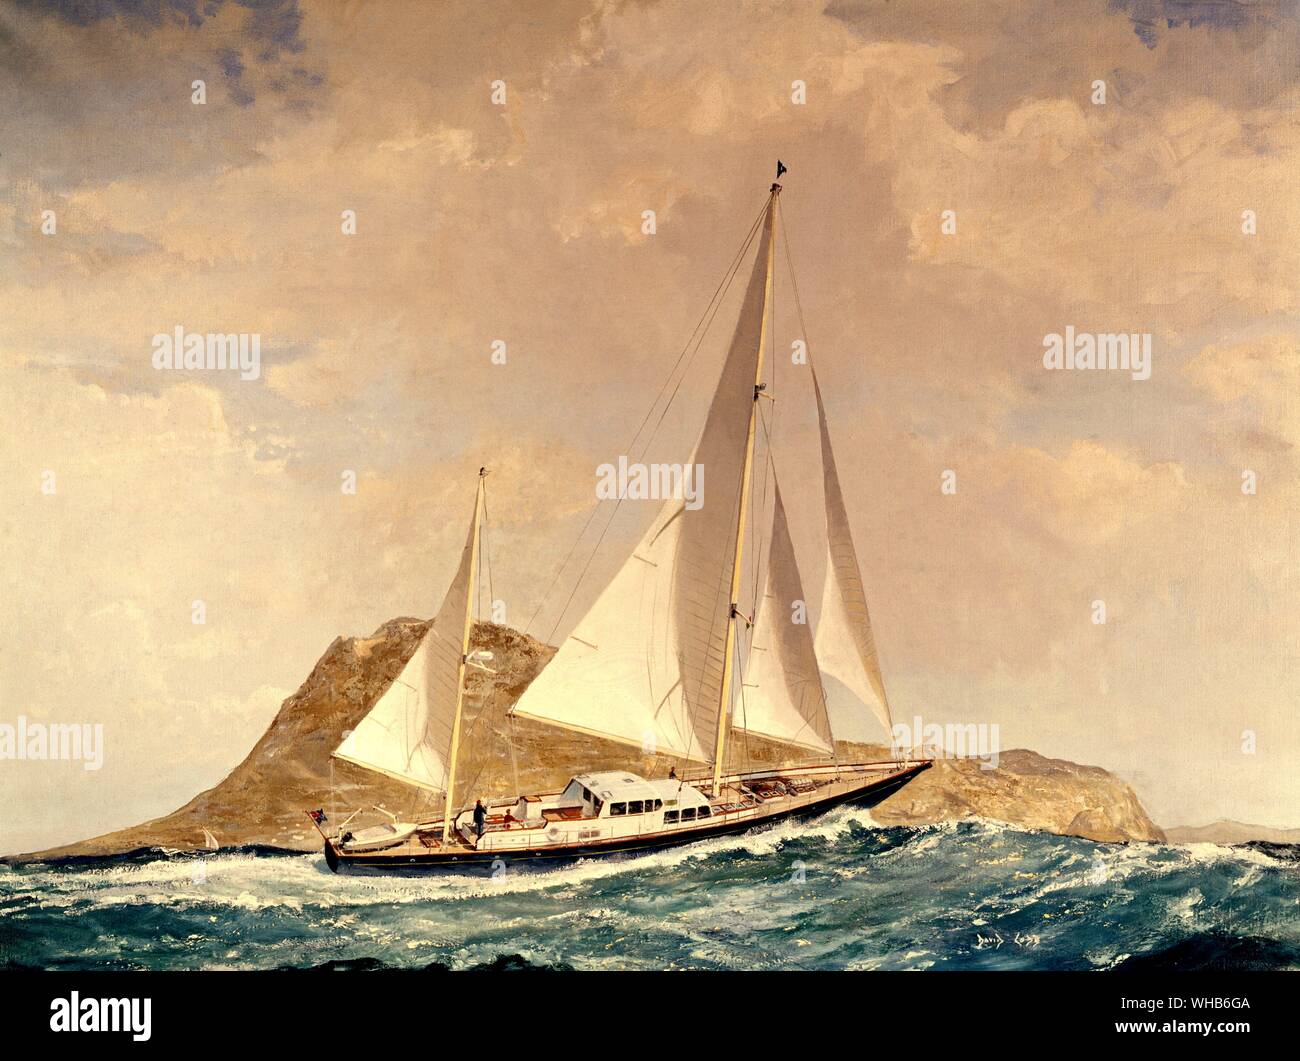 Motor-sailer Blue Leopard, one of the most adanced yachts of her type, of light displacement and high power engines, with high performances under both sail and power - painting by David Cobb. Stock Photo